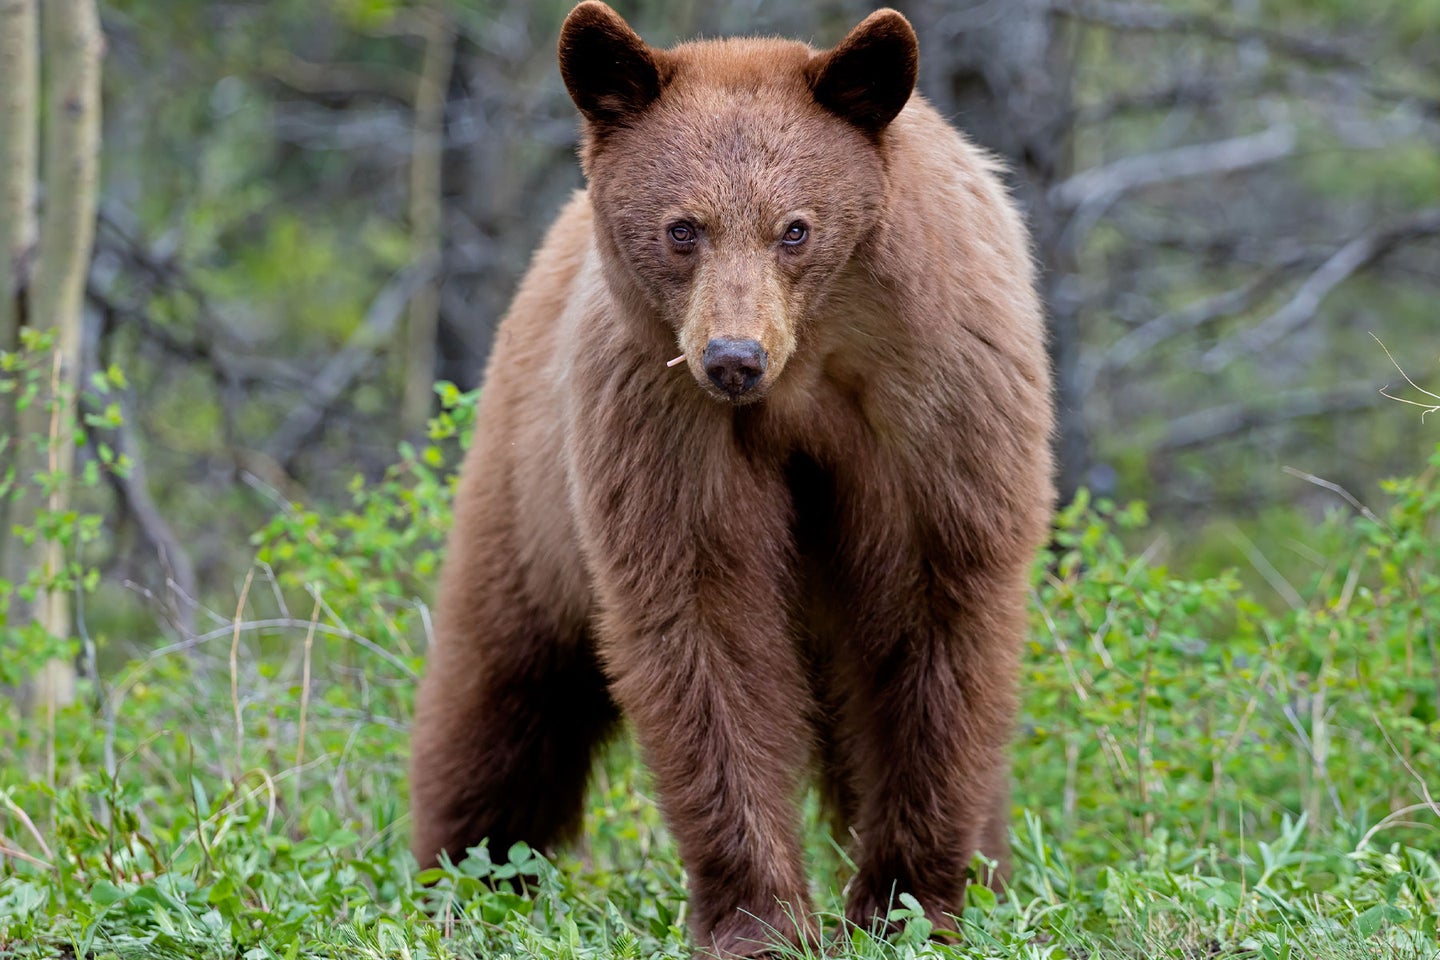 There are an estimated 17,000 to 20,000 black bears in Colorado, according to CPW. 